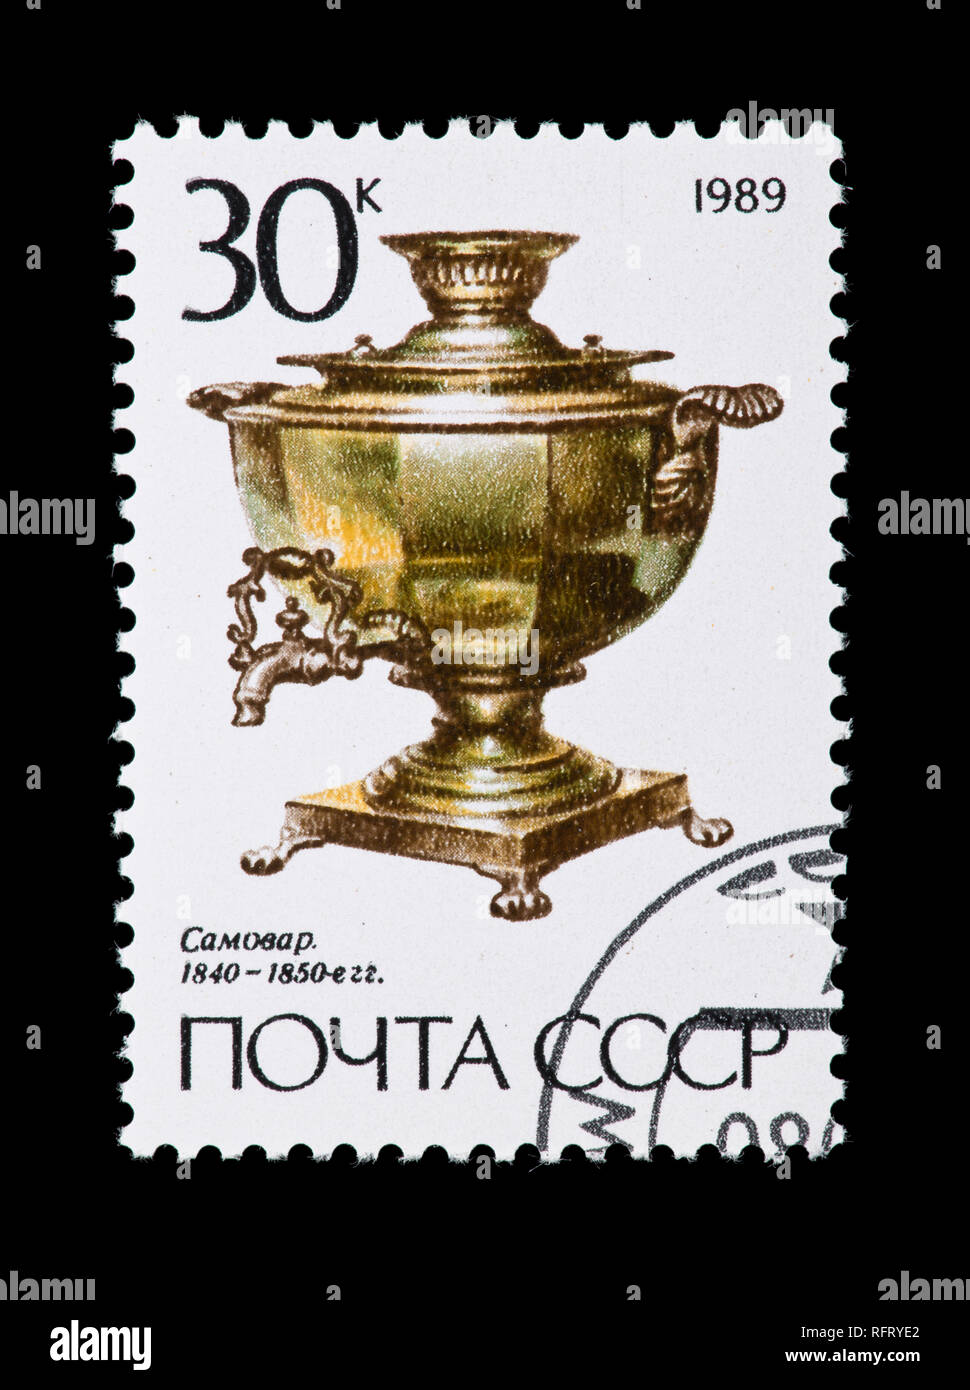 Postage stamp from the Soviet Union depicting a samovar, vase shaped urn by Nikolari Malikov Studio in Tula, held by the State Museum. Stock Photo